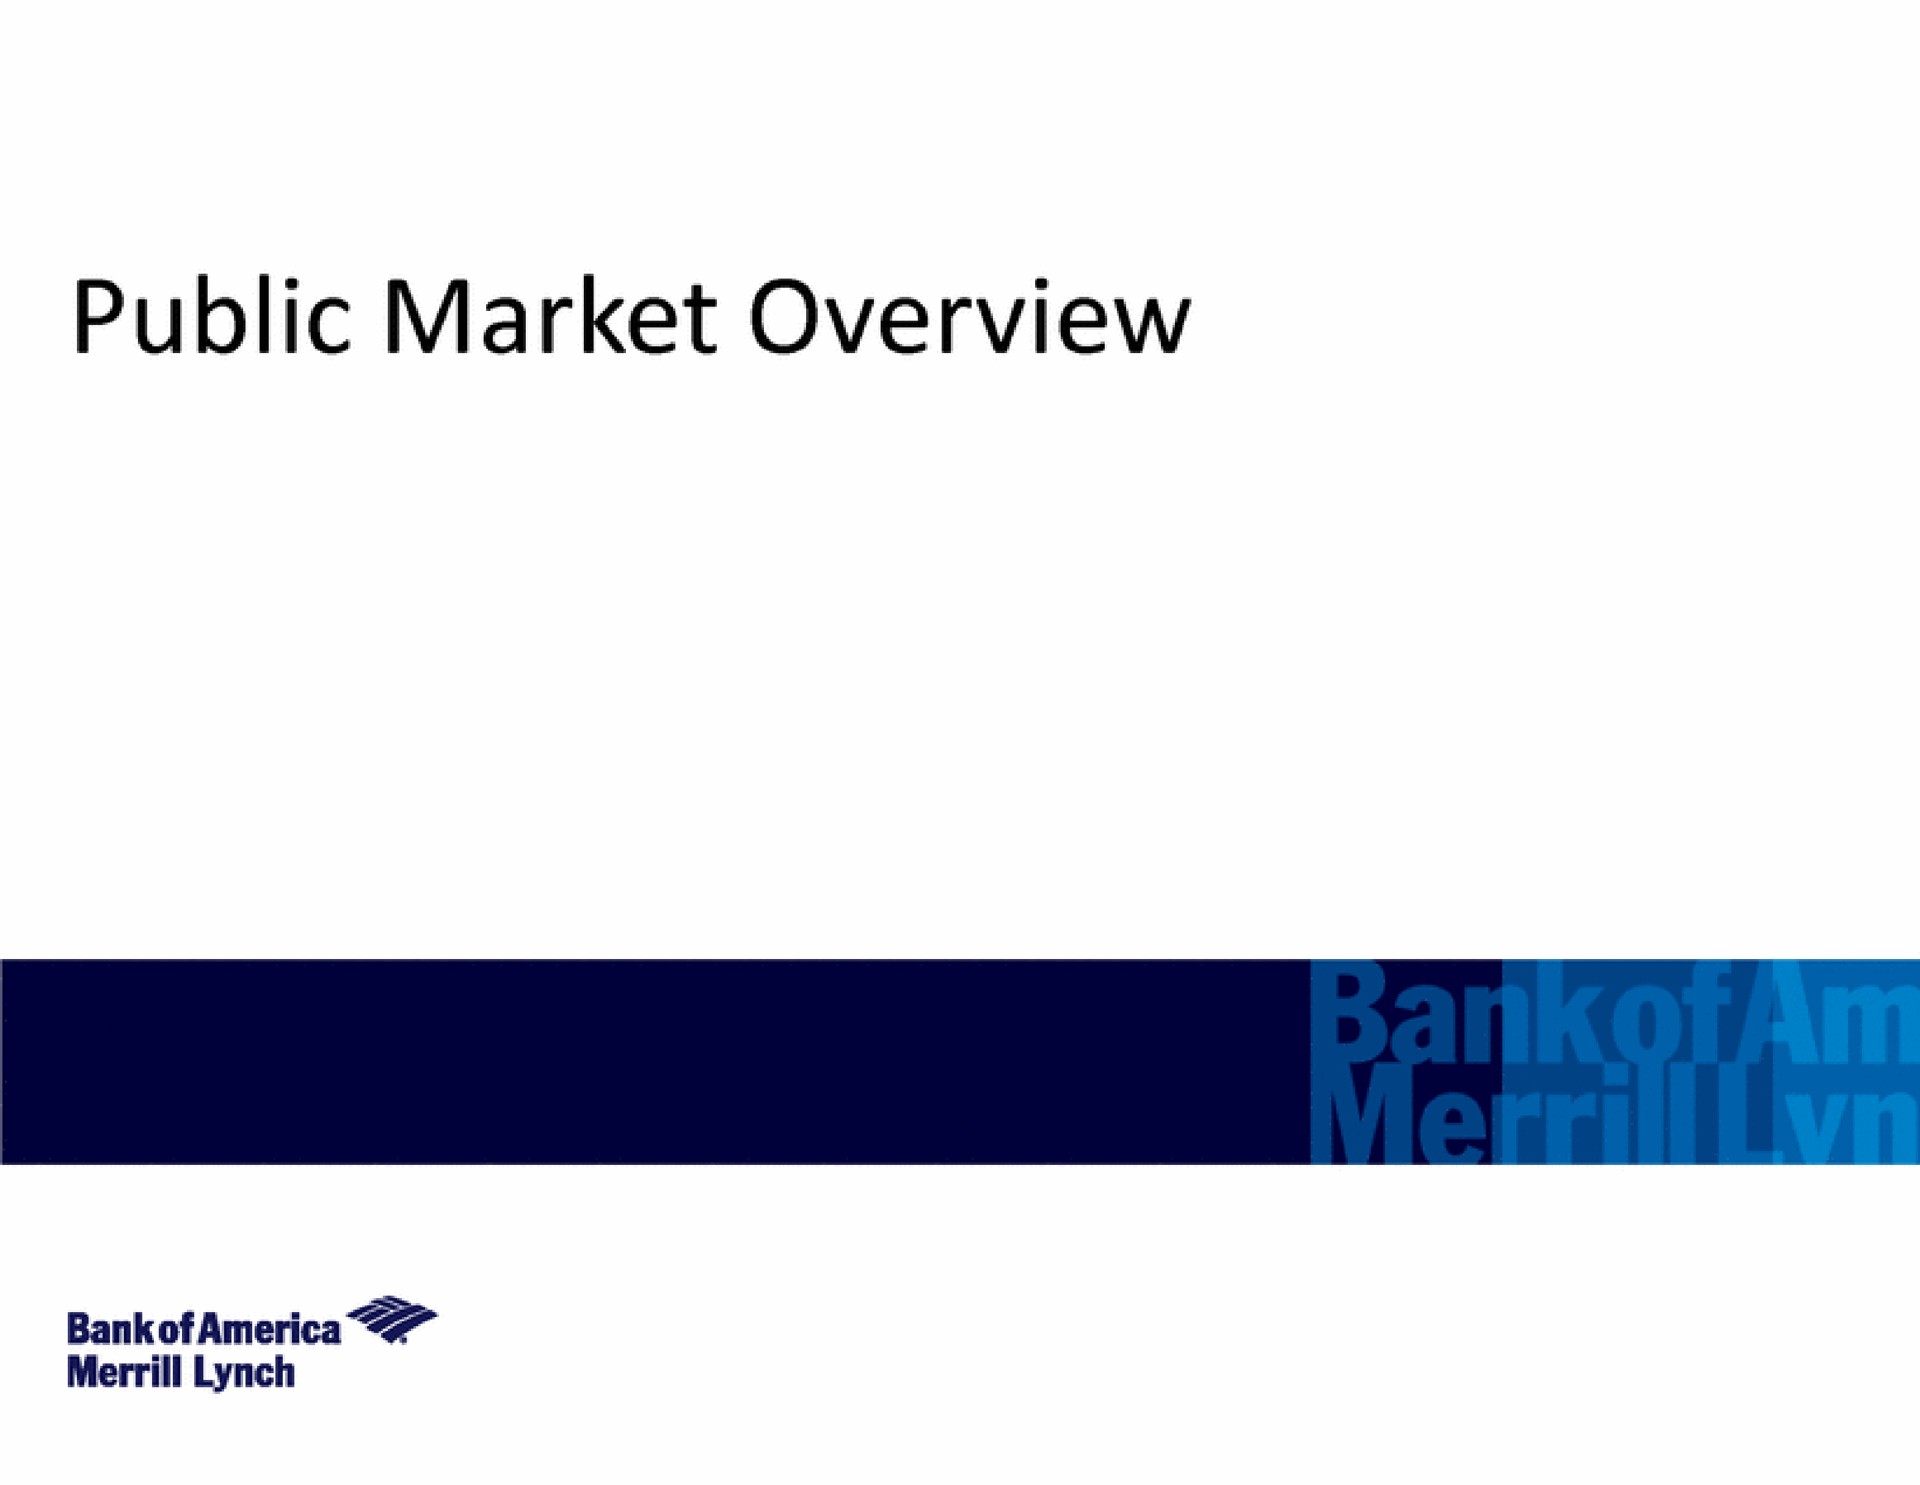 public market overview lynch | Bank of America